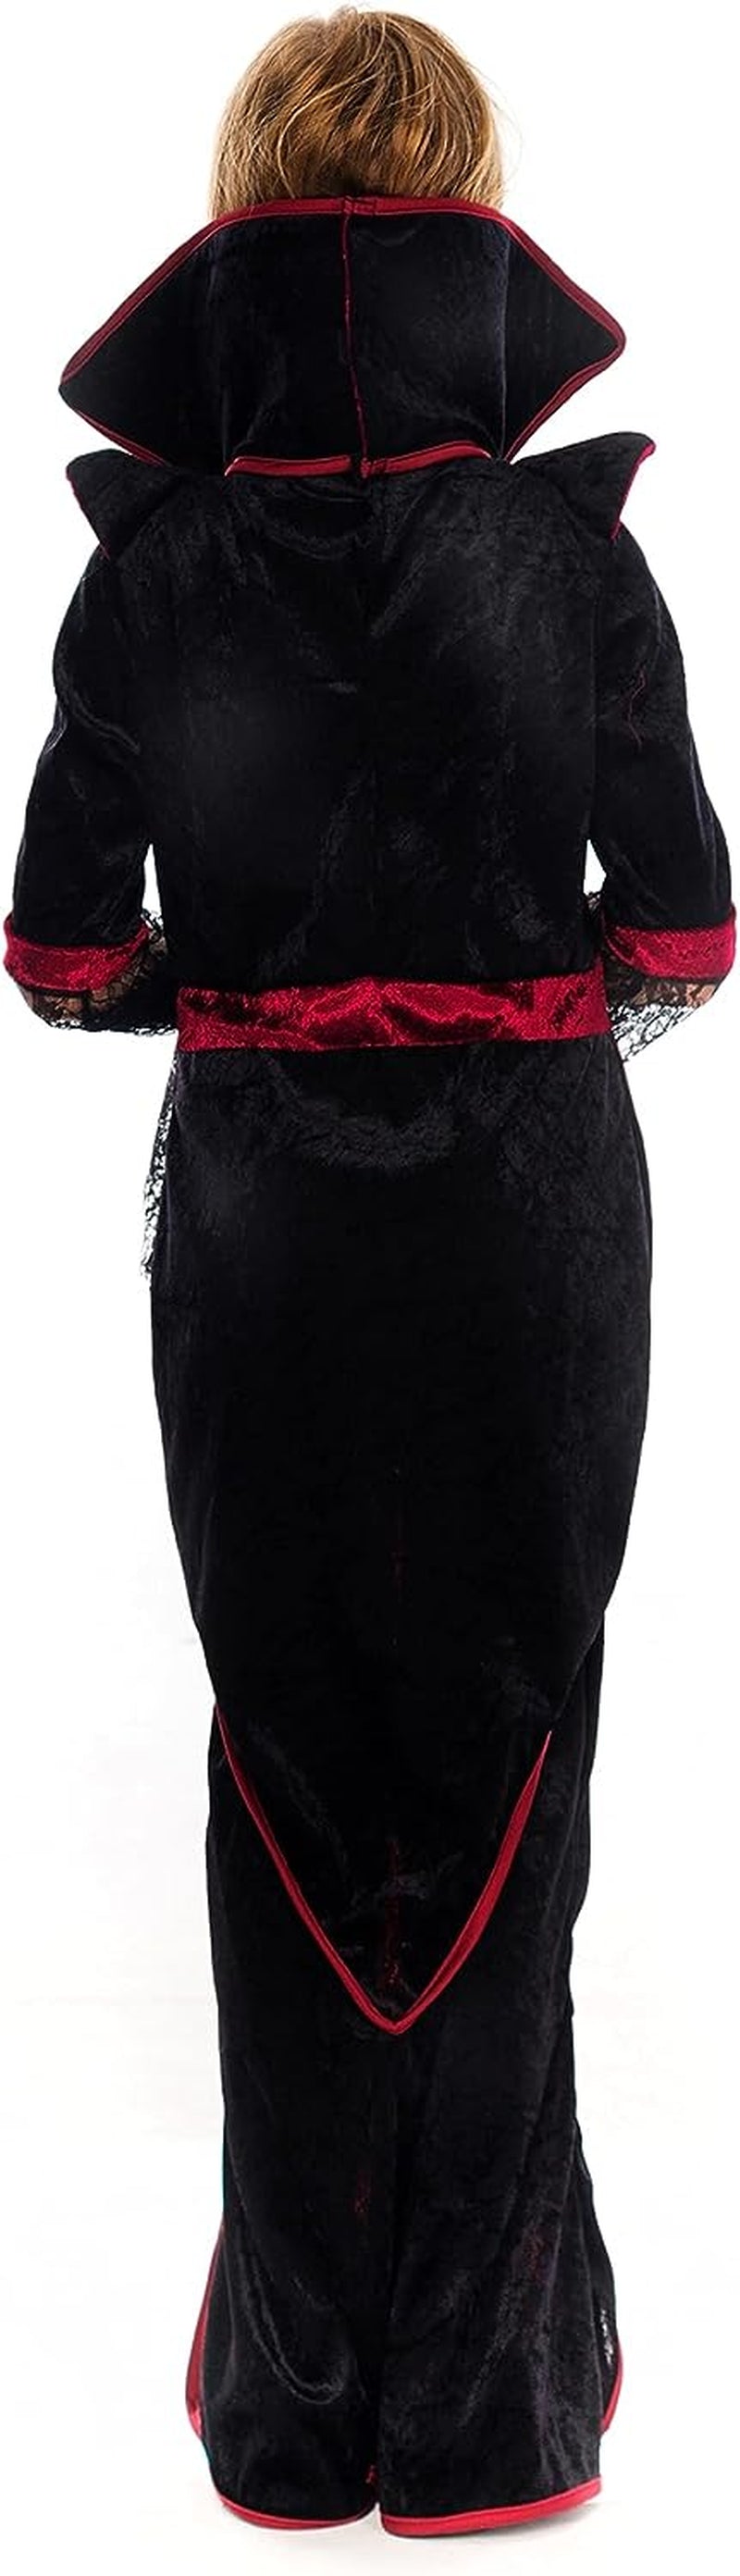 Spooktacular Creations Royal Vampire Costume for Girls Deluxe Set Halloween Gothic Victorian Vampiress Queen Dress up Party